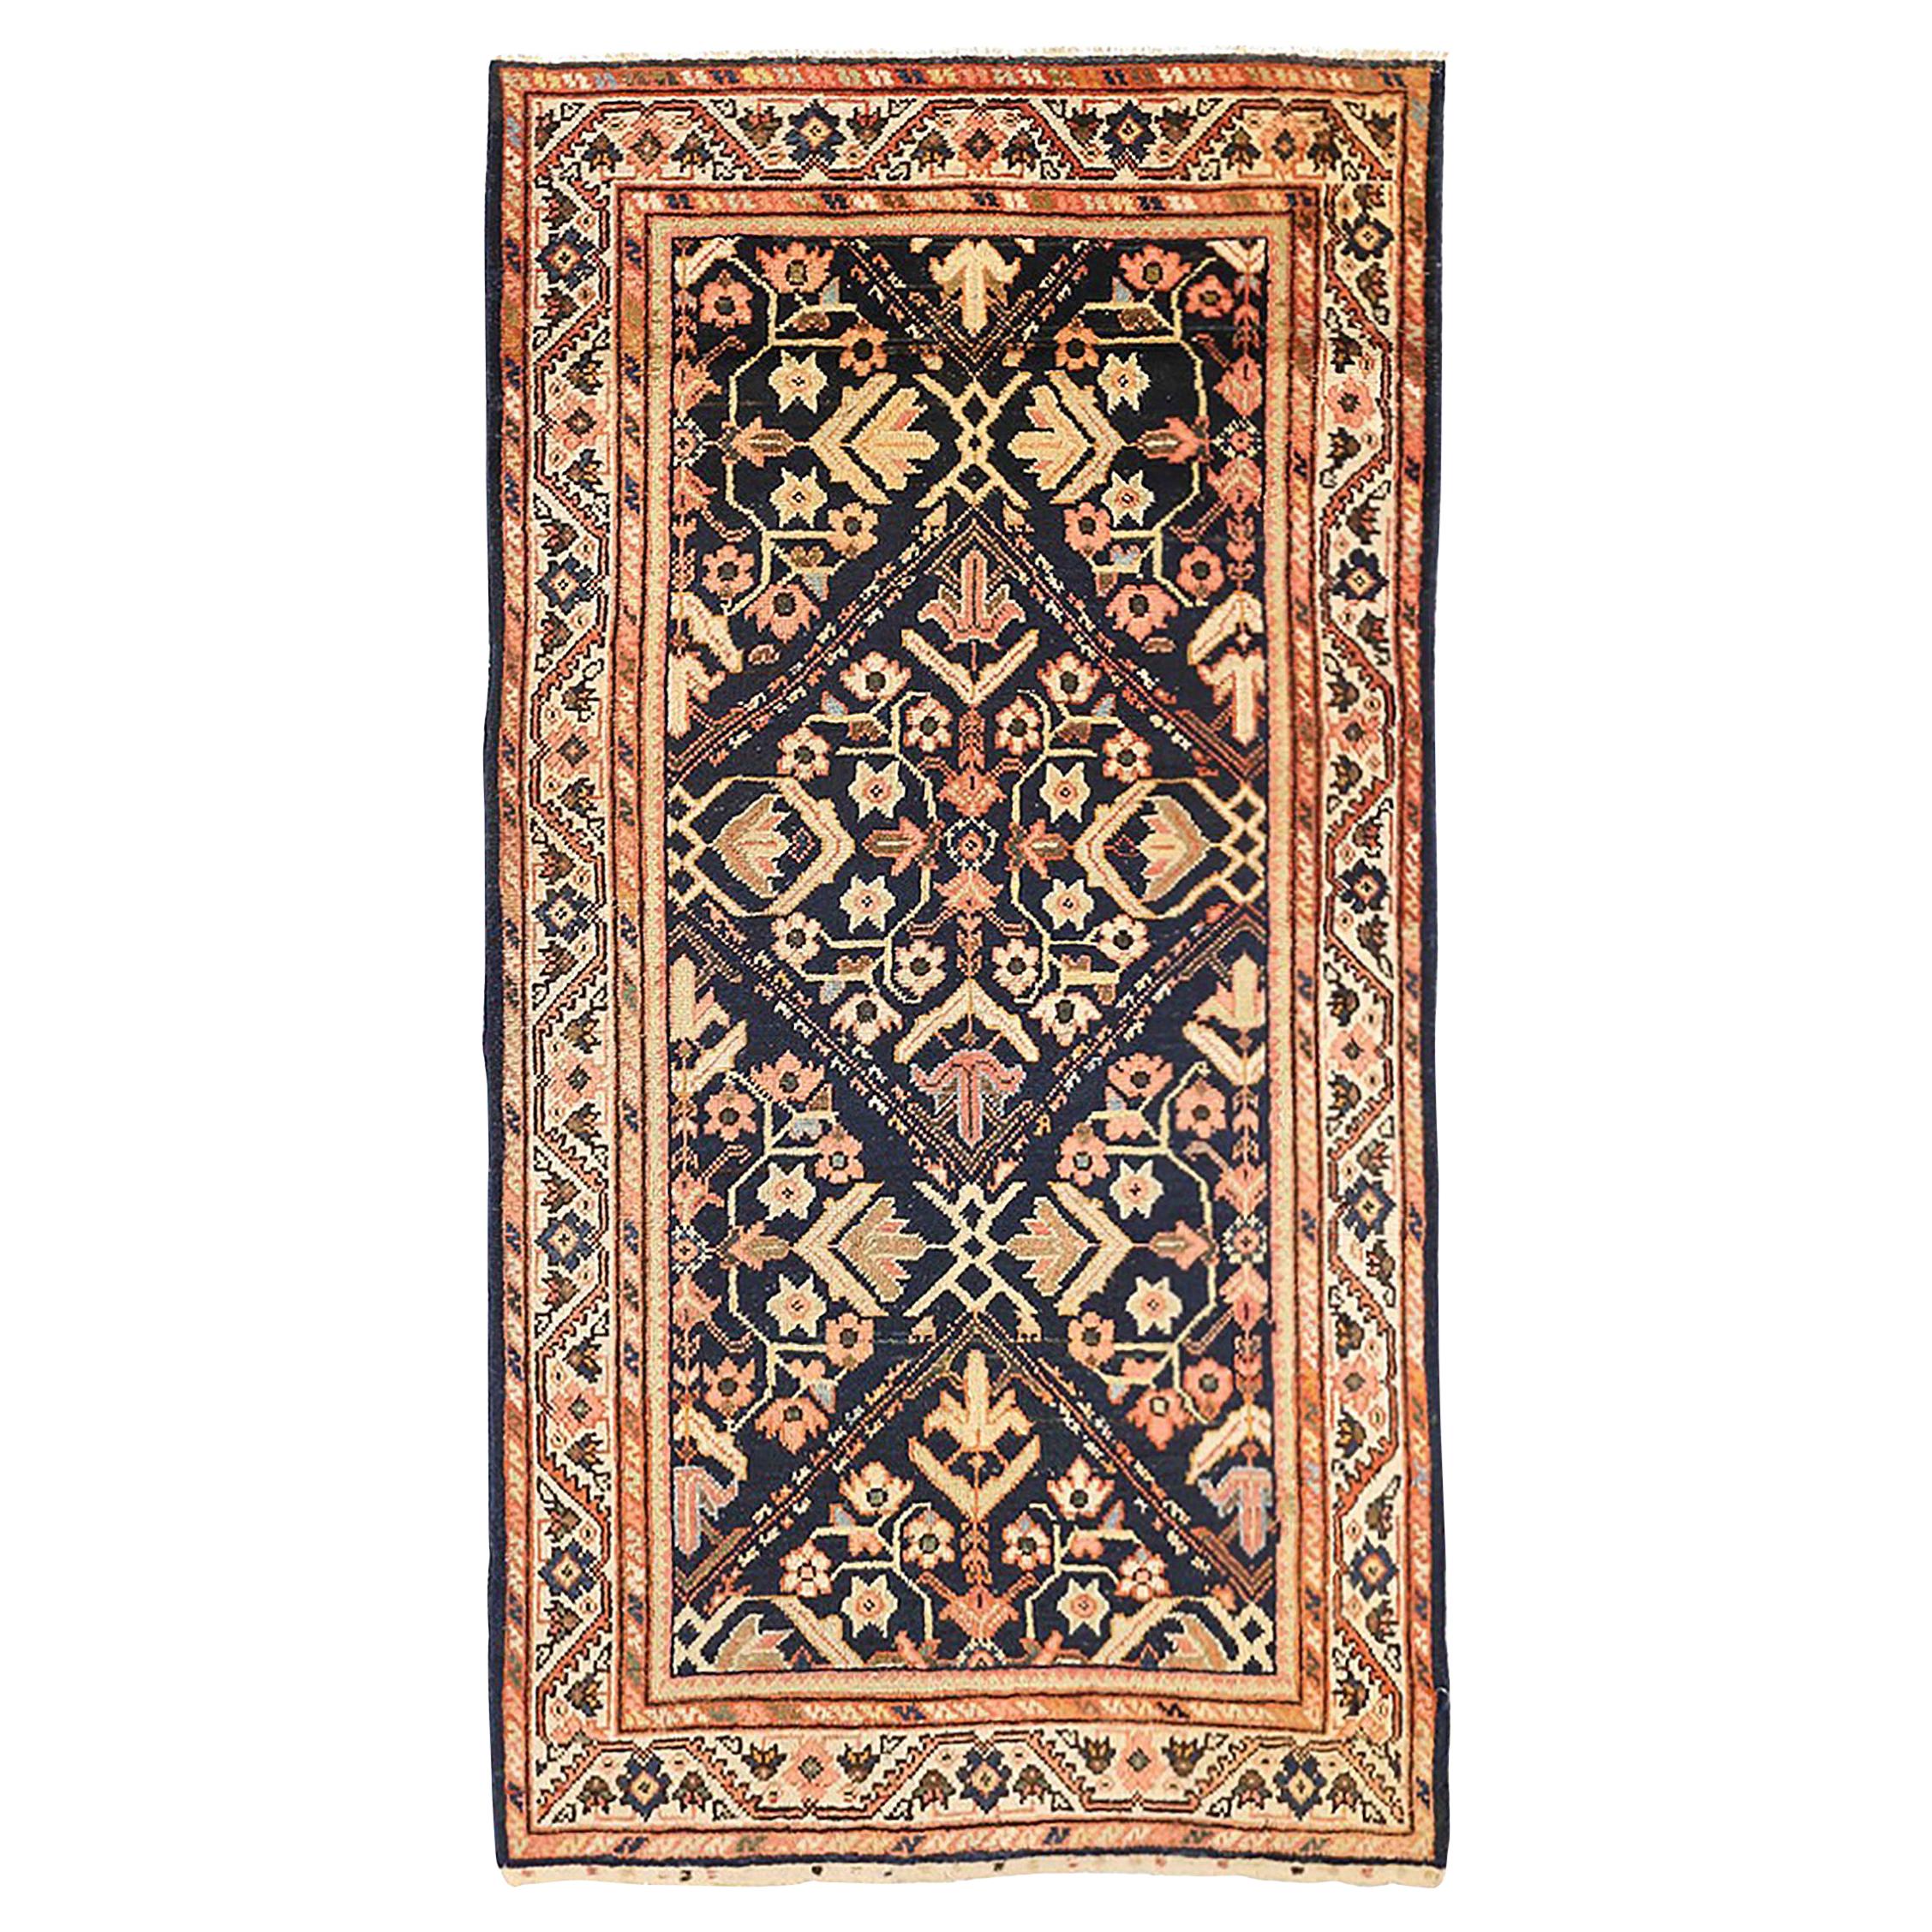 Antique Persian Mahal Rug with Beige and Rust Floral Details on Ivory Field